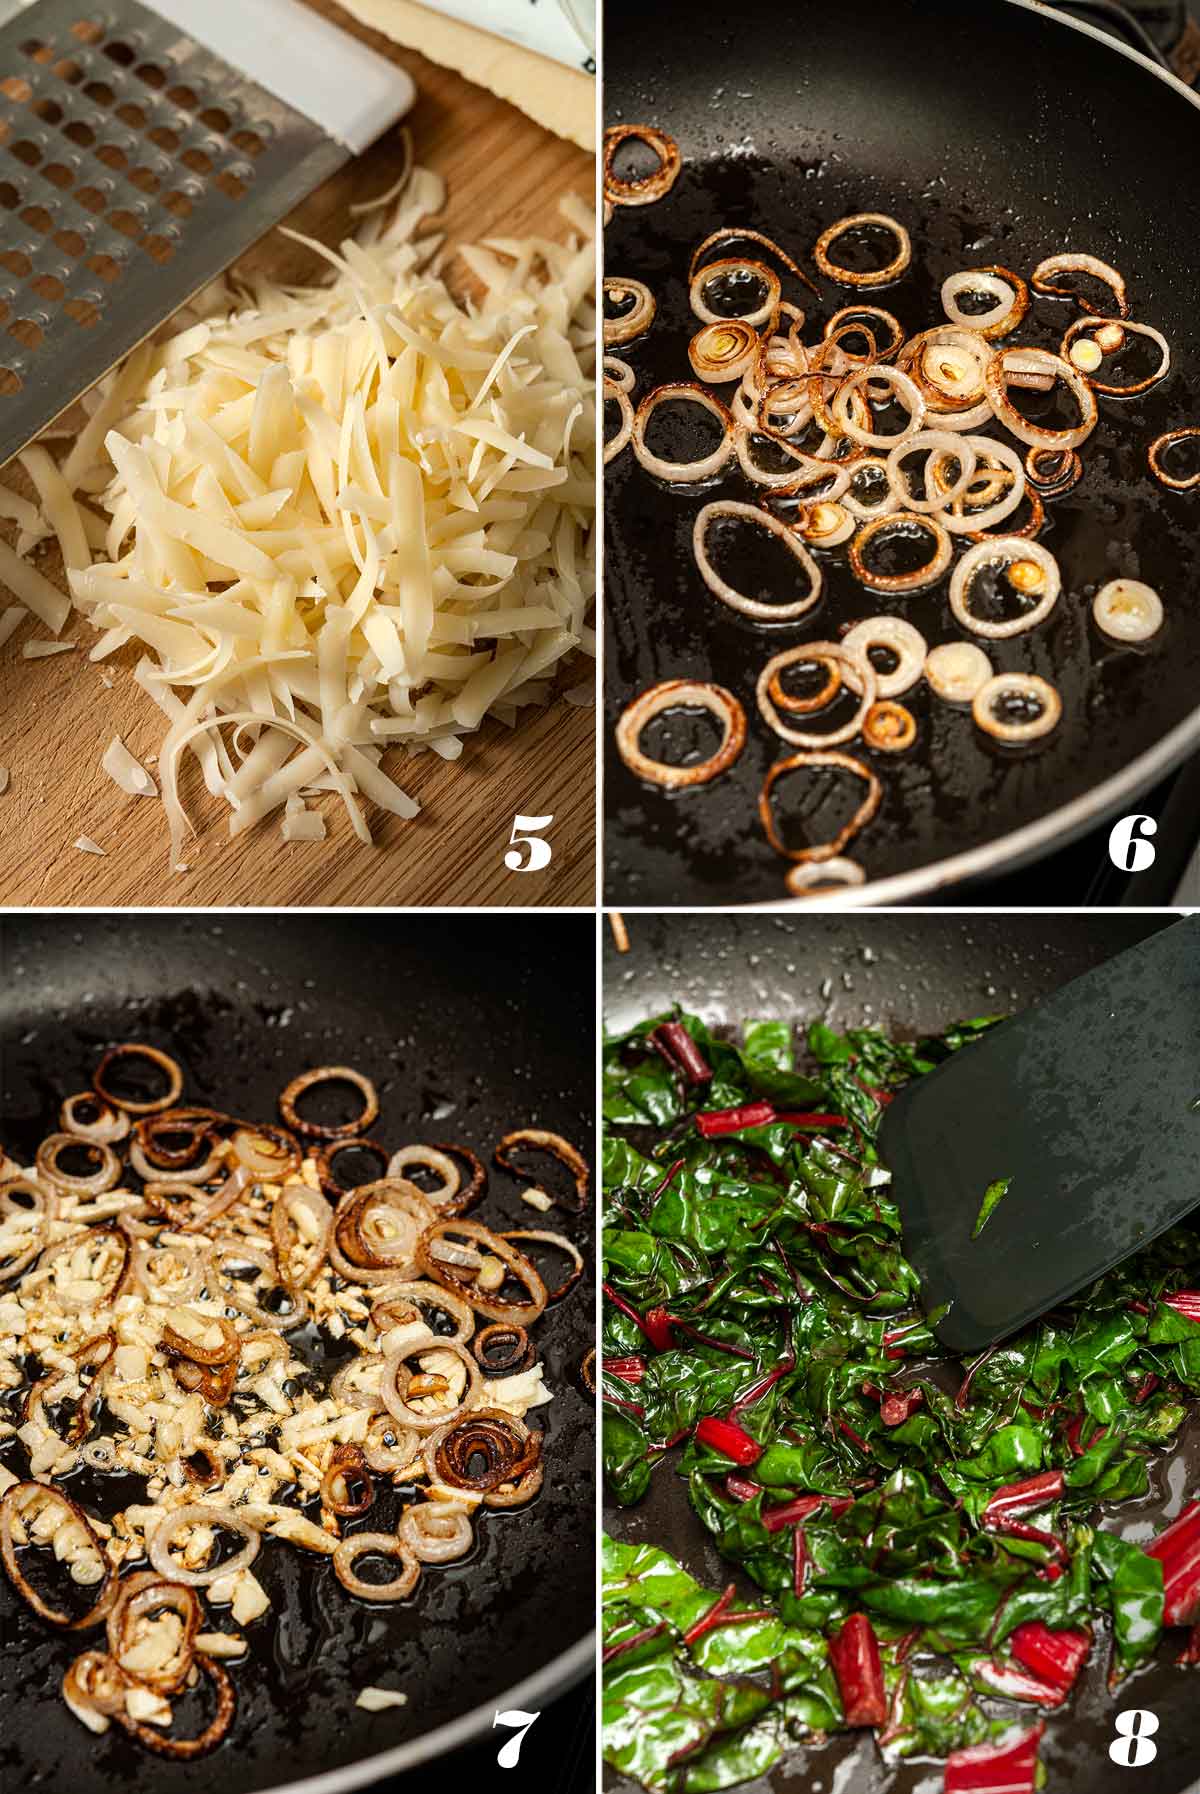 A collage of 4 numbered images showing how to make risotto-stuffed portobello mushrooms.